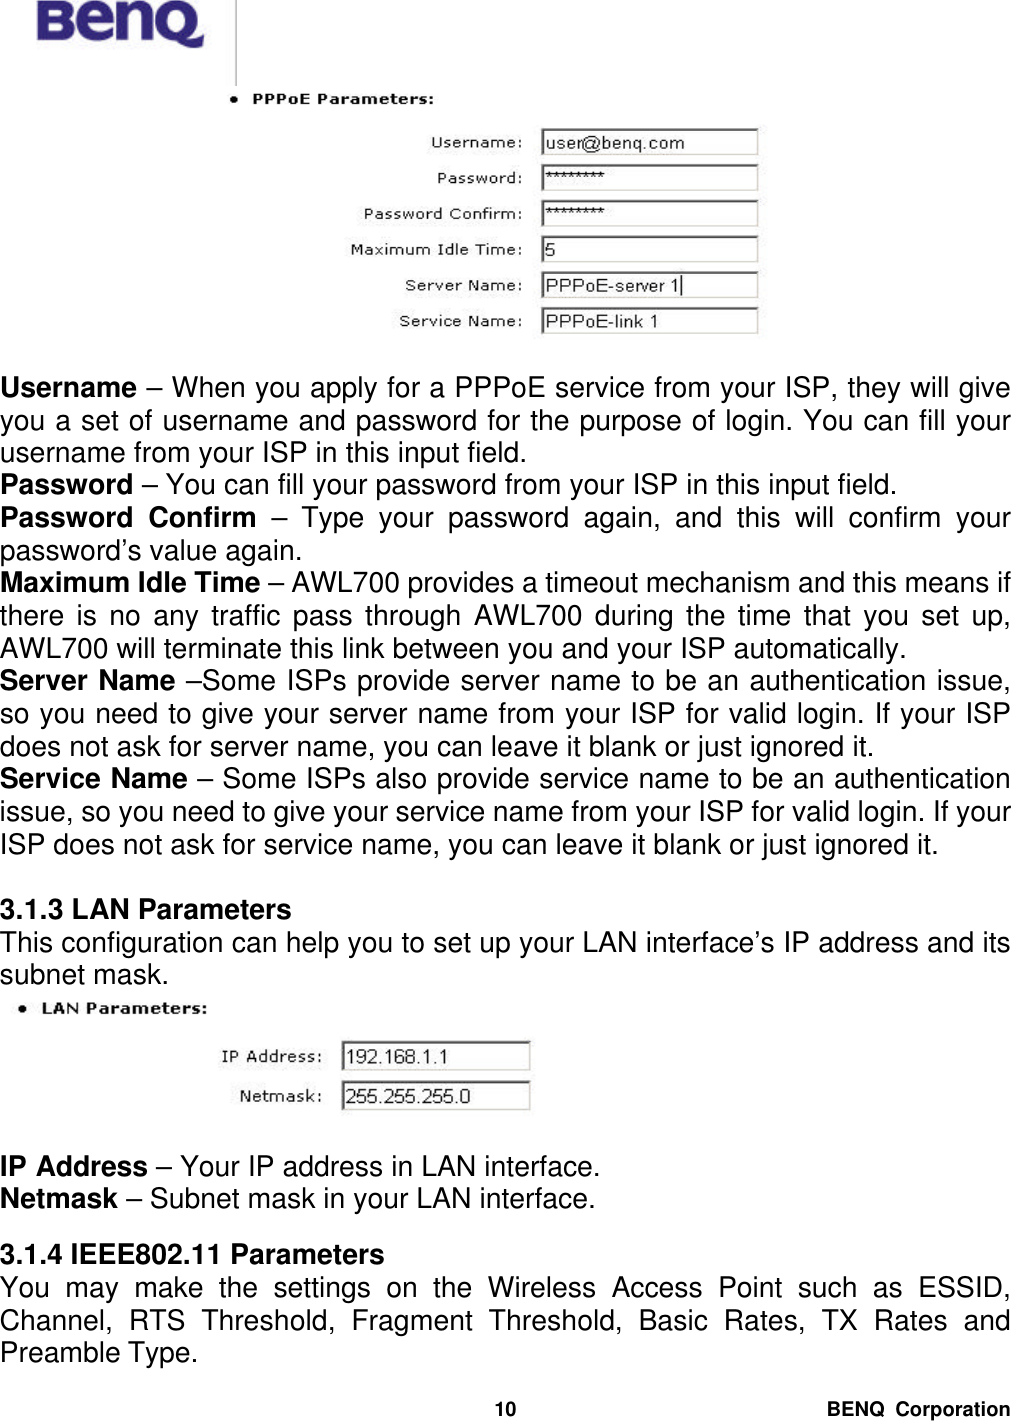  BENQ Corporation 10  Username – When you apply for a PPPoE service from your ISP, they will give you a set of username and password for the purpose of login. You can fill your username from your ISP in this input field. Password – You can fill your password from your ISP in this input field. Password Confirm  – Type your password again, and this will confirm your password’s value again. Maximum Idle Time – AWL700 provides a timeout mechanism and this means if there is no any traffic pass through AWL700 during the time that you set up, AWL700 will terminate this link between you and your ISP automatically. Server Name –Some ISPs provide server name to be an authentication issue, so you need to give your server name from your ISP for valid login. If your ISP does not ask for server name, you can leave it blank or just ignored it. Service Name – Some ISPs also provide service name to be an authentication issue, so you need to give your service name from your ISP for valid login. If your ISP does not ask for service name, you can leave it blank or just ignored it.  3.1.3 LAN Parameters This configuration can help you to set up your LAN interface’s IP address and its subnet mask.   IP Address – Your IP address in LAN interface. Netmask – Subnet mask in your LAN interface.  3.1.4 IEEE802.11 Parameters You may make the settings on the Wireless Access Point such as ESSID, Channel, RTS Threshold, Fragment Threshold,  Basic Rates, TX Rates and Preamble Type. 